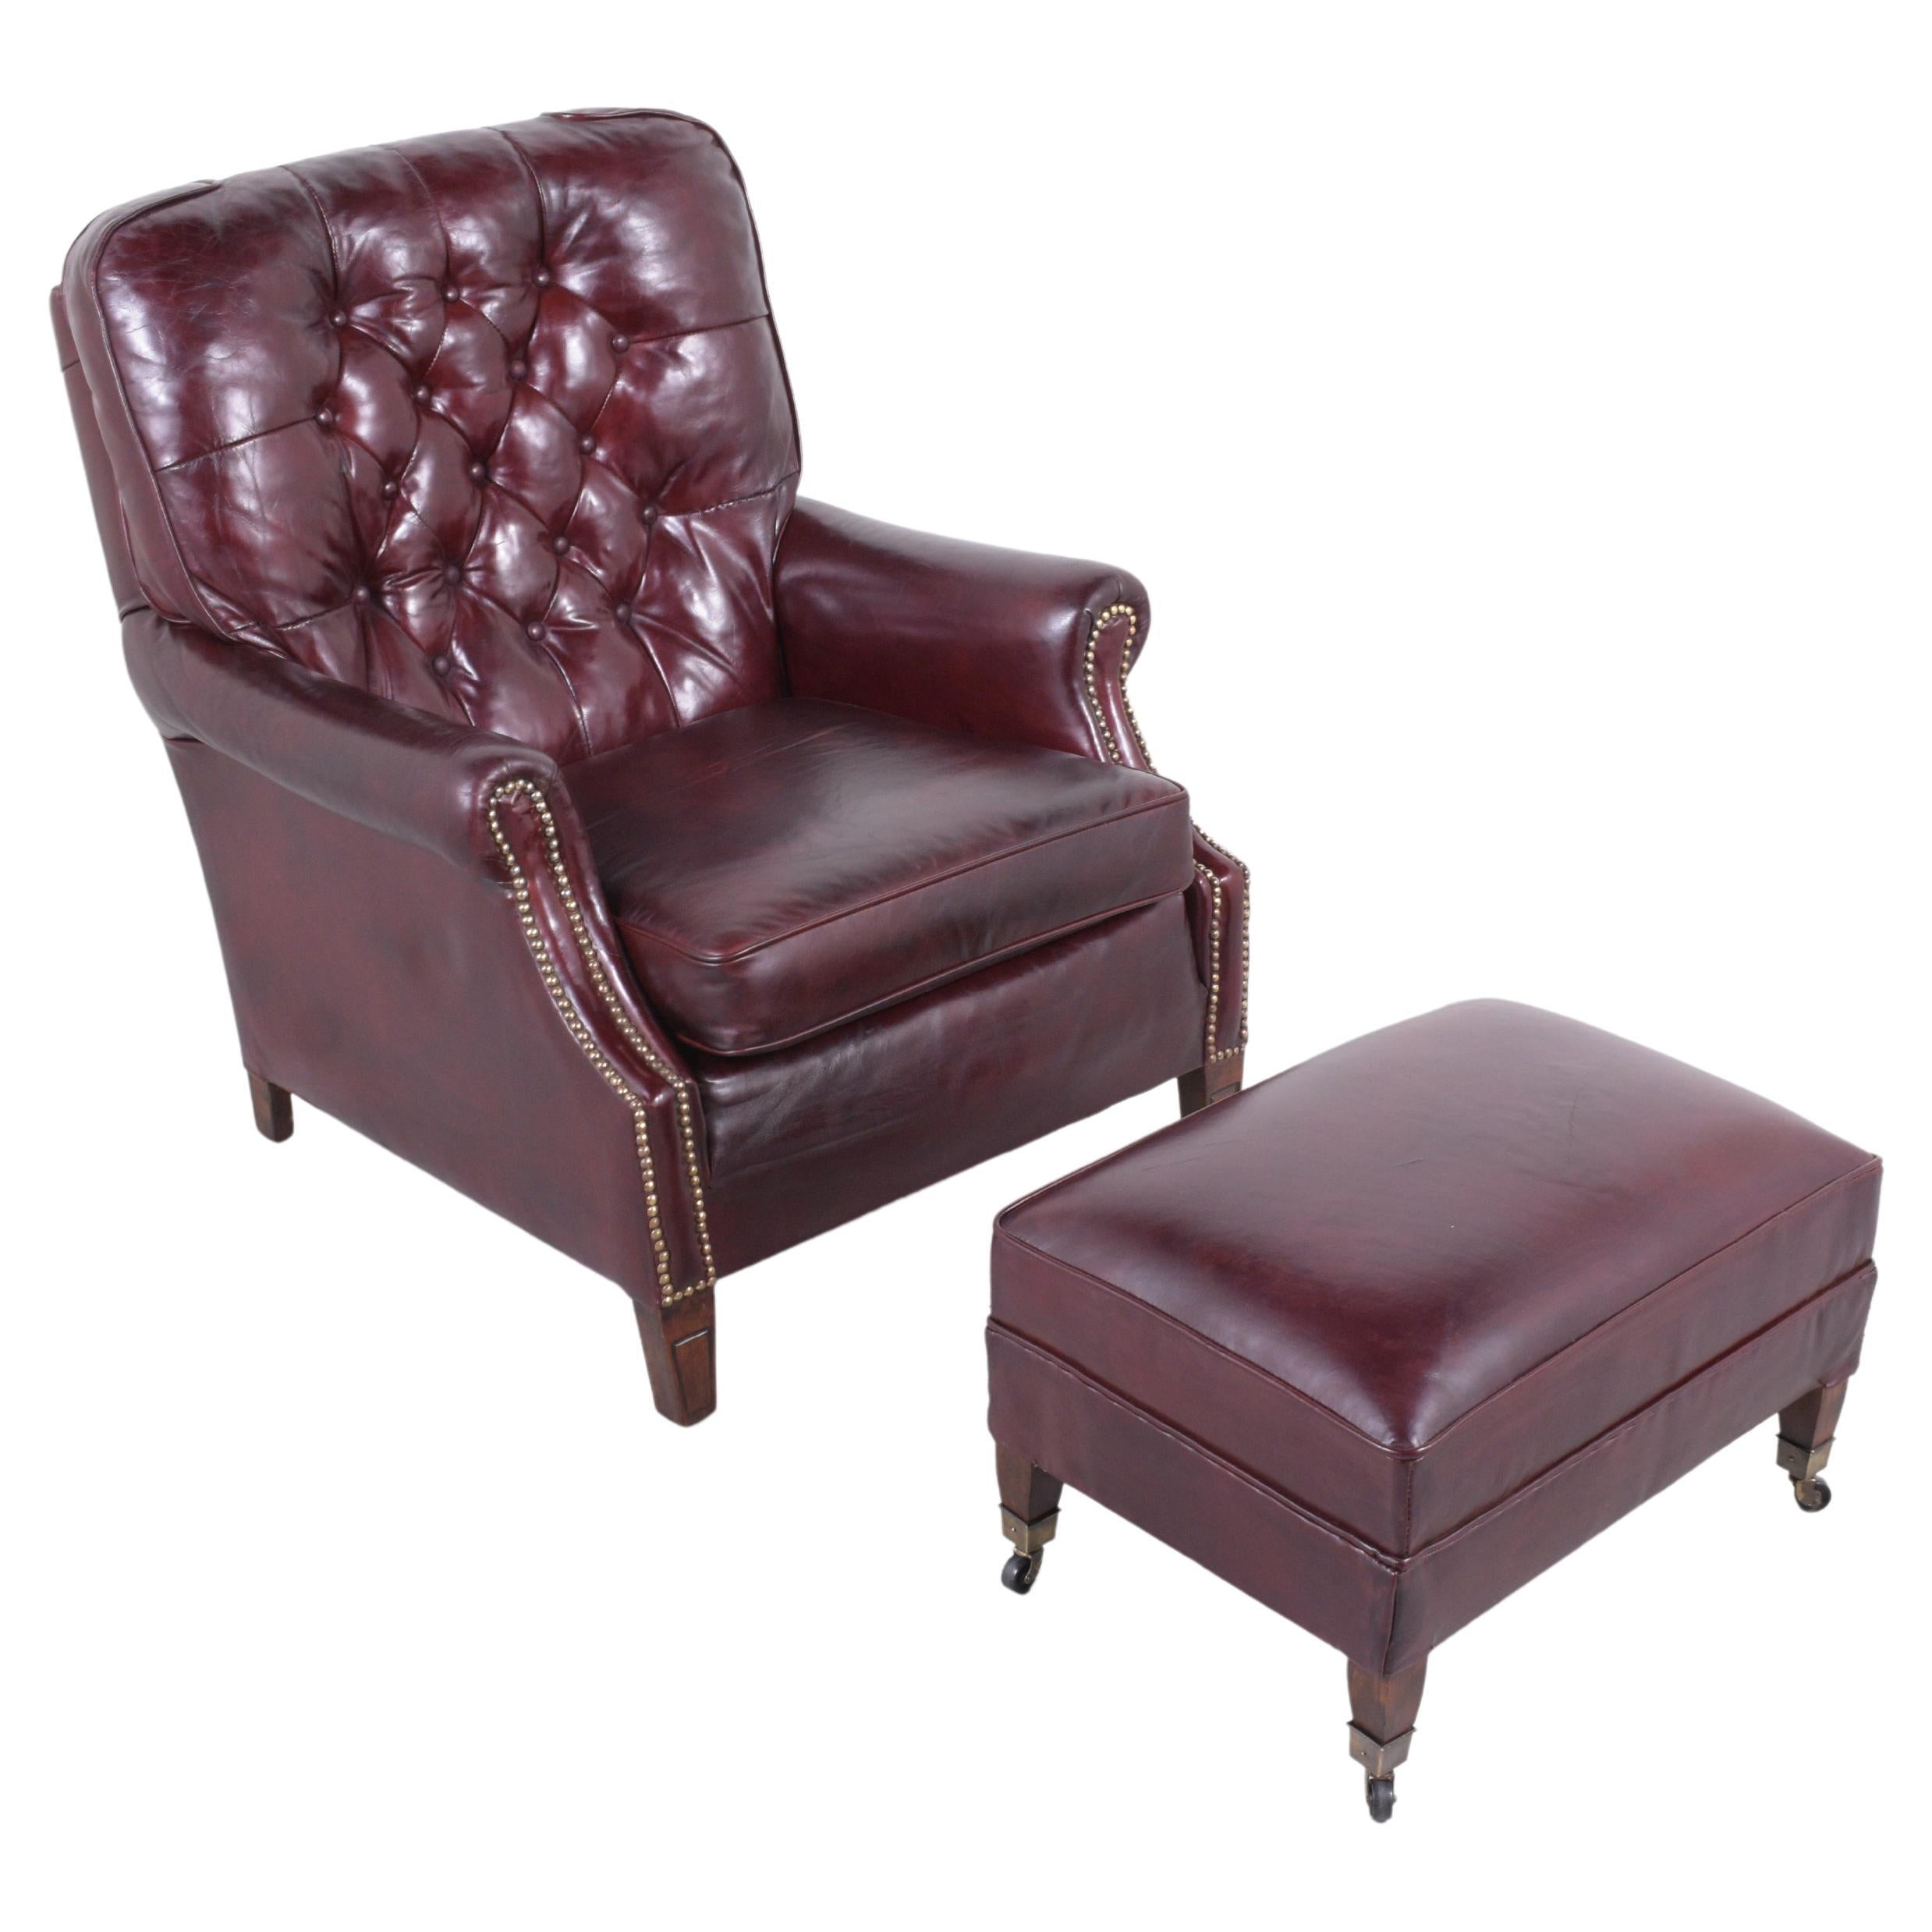 Antique English Chesterfield Lounge Chair: Cordovan Red Leather Tufted Design For Sale